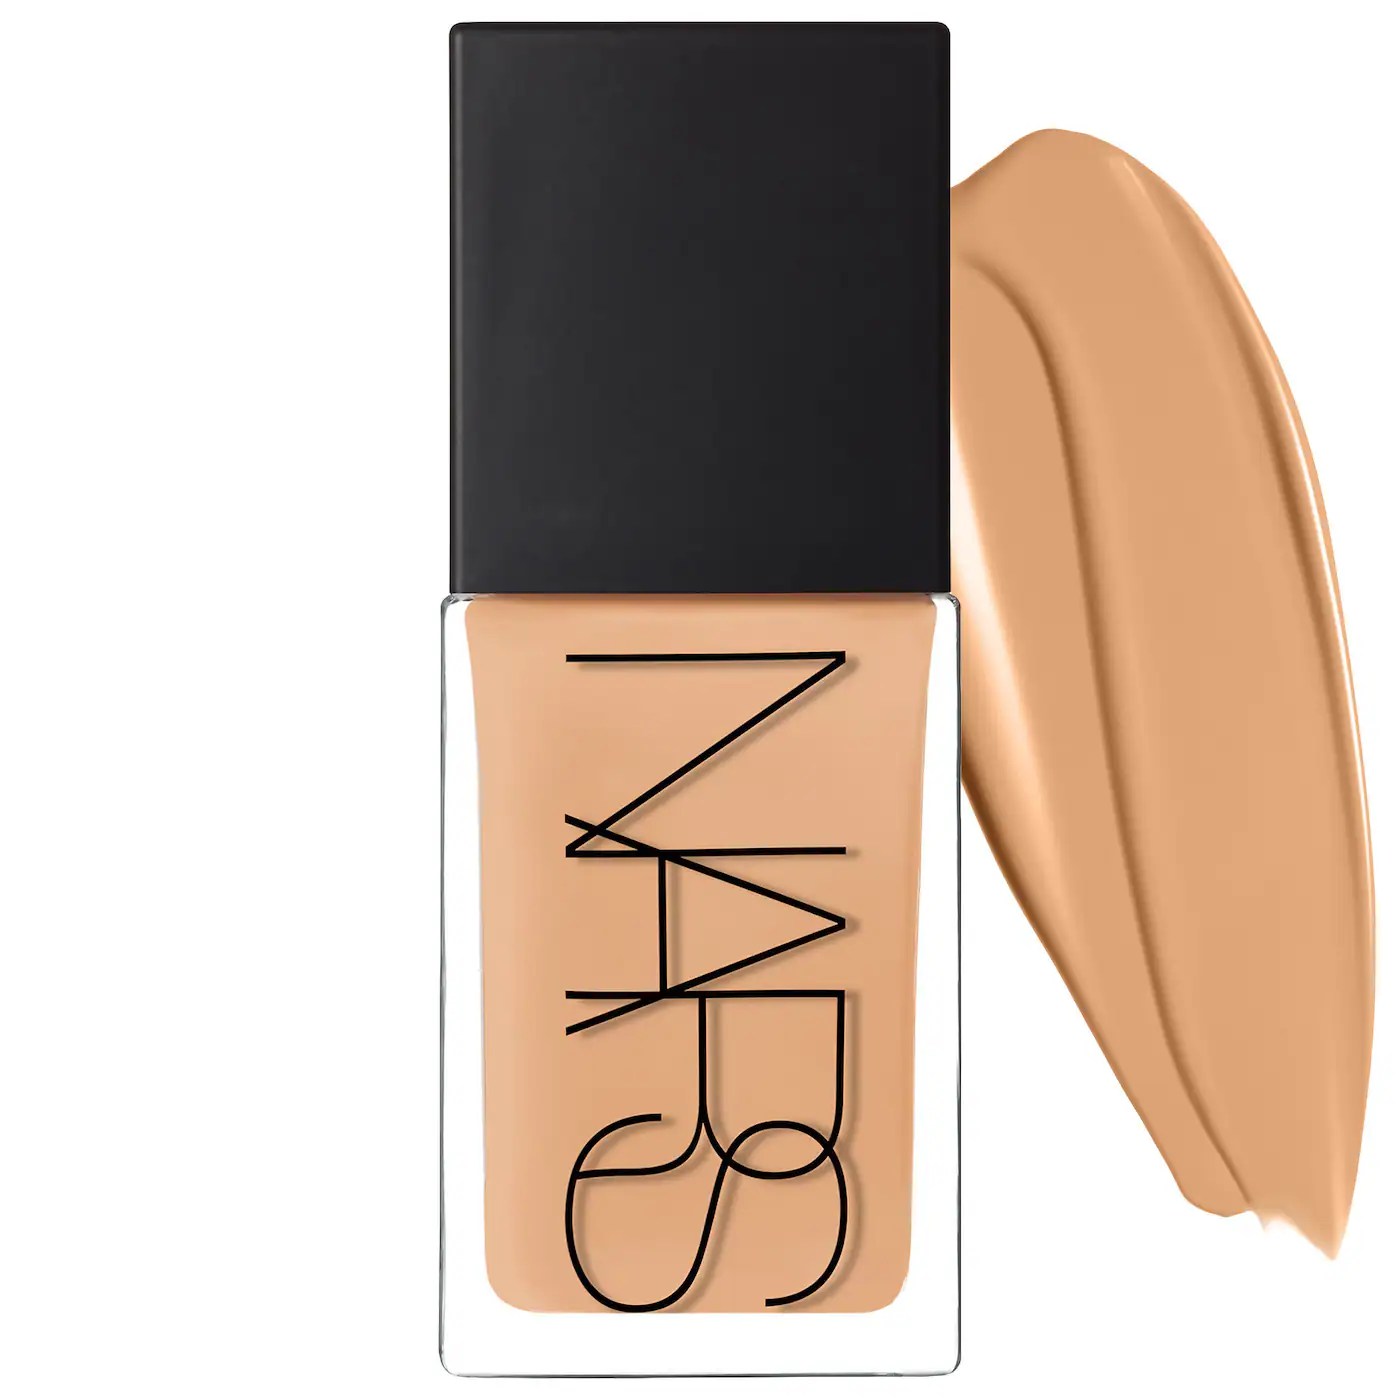 nars light reflecting advanced skincare, one of the best foundations for acne-prone skin